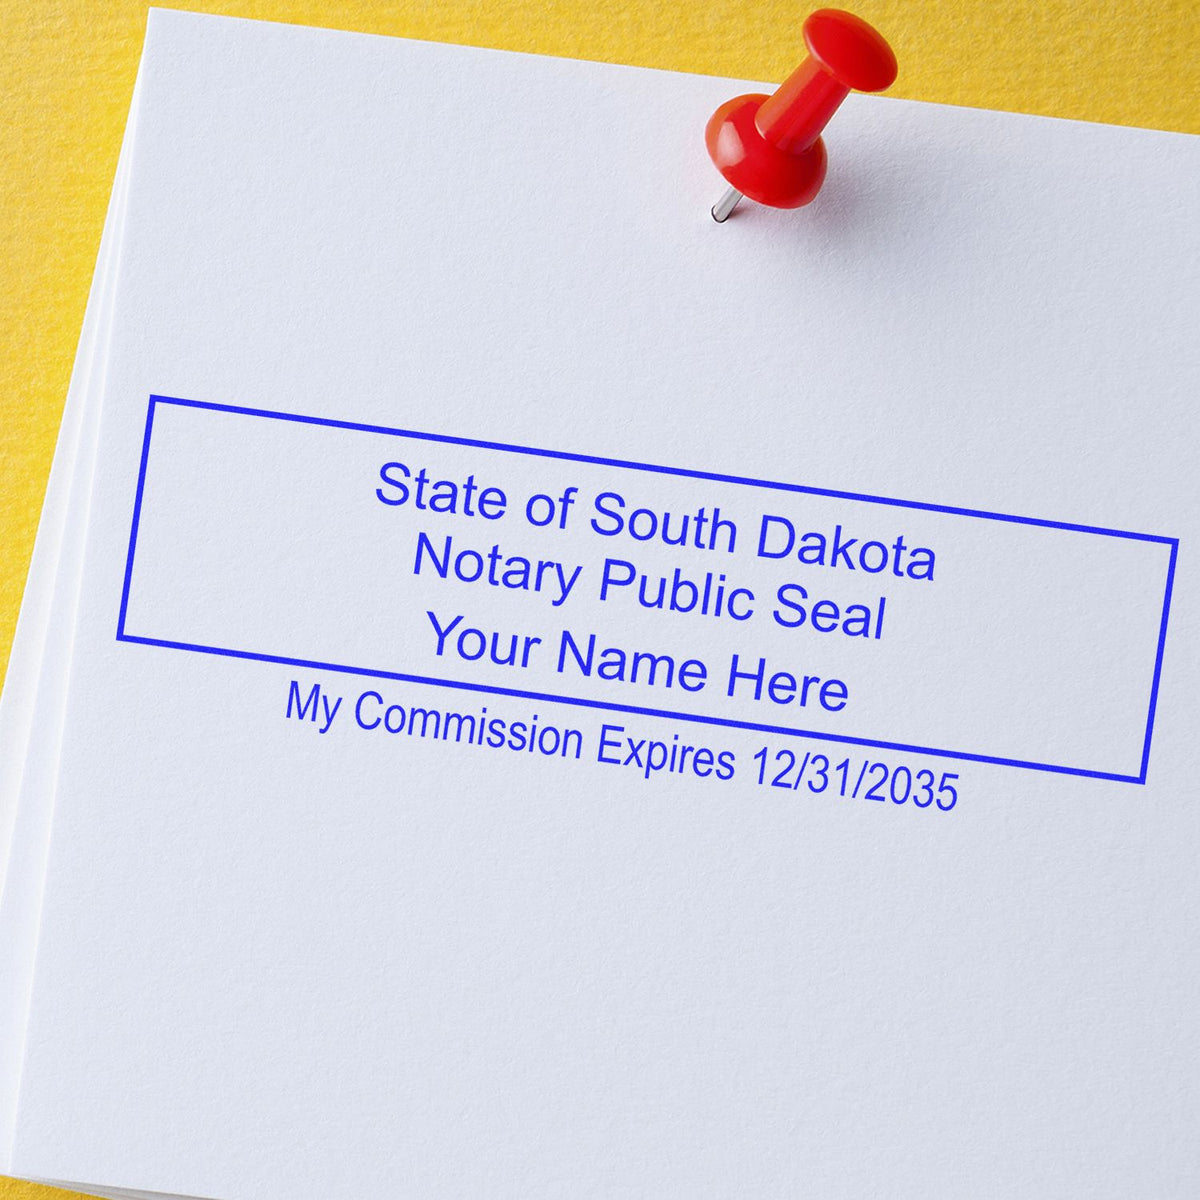 A lifestyle photo showing a stamped image of the Wooden Handle South Dakota Rectangular Notary Public Stamp on a piece of paper